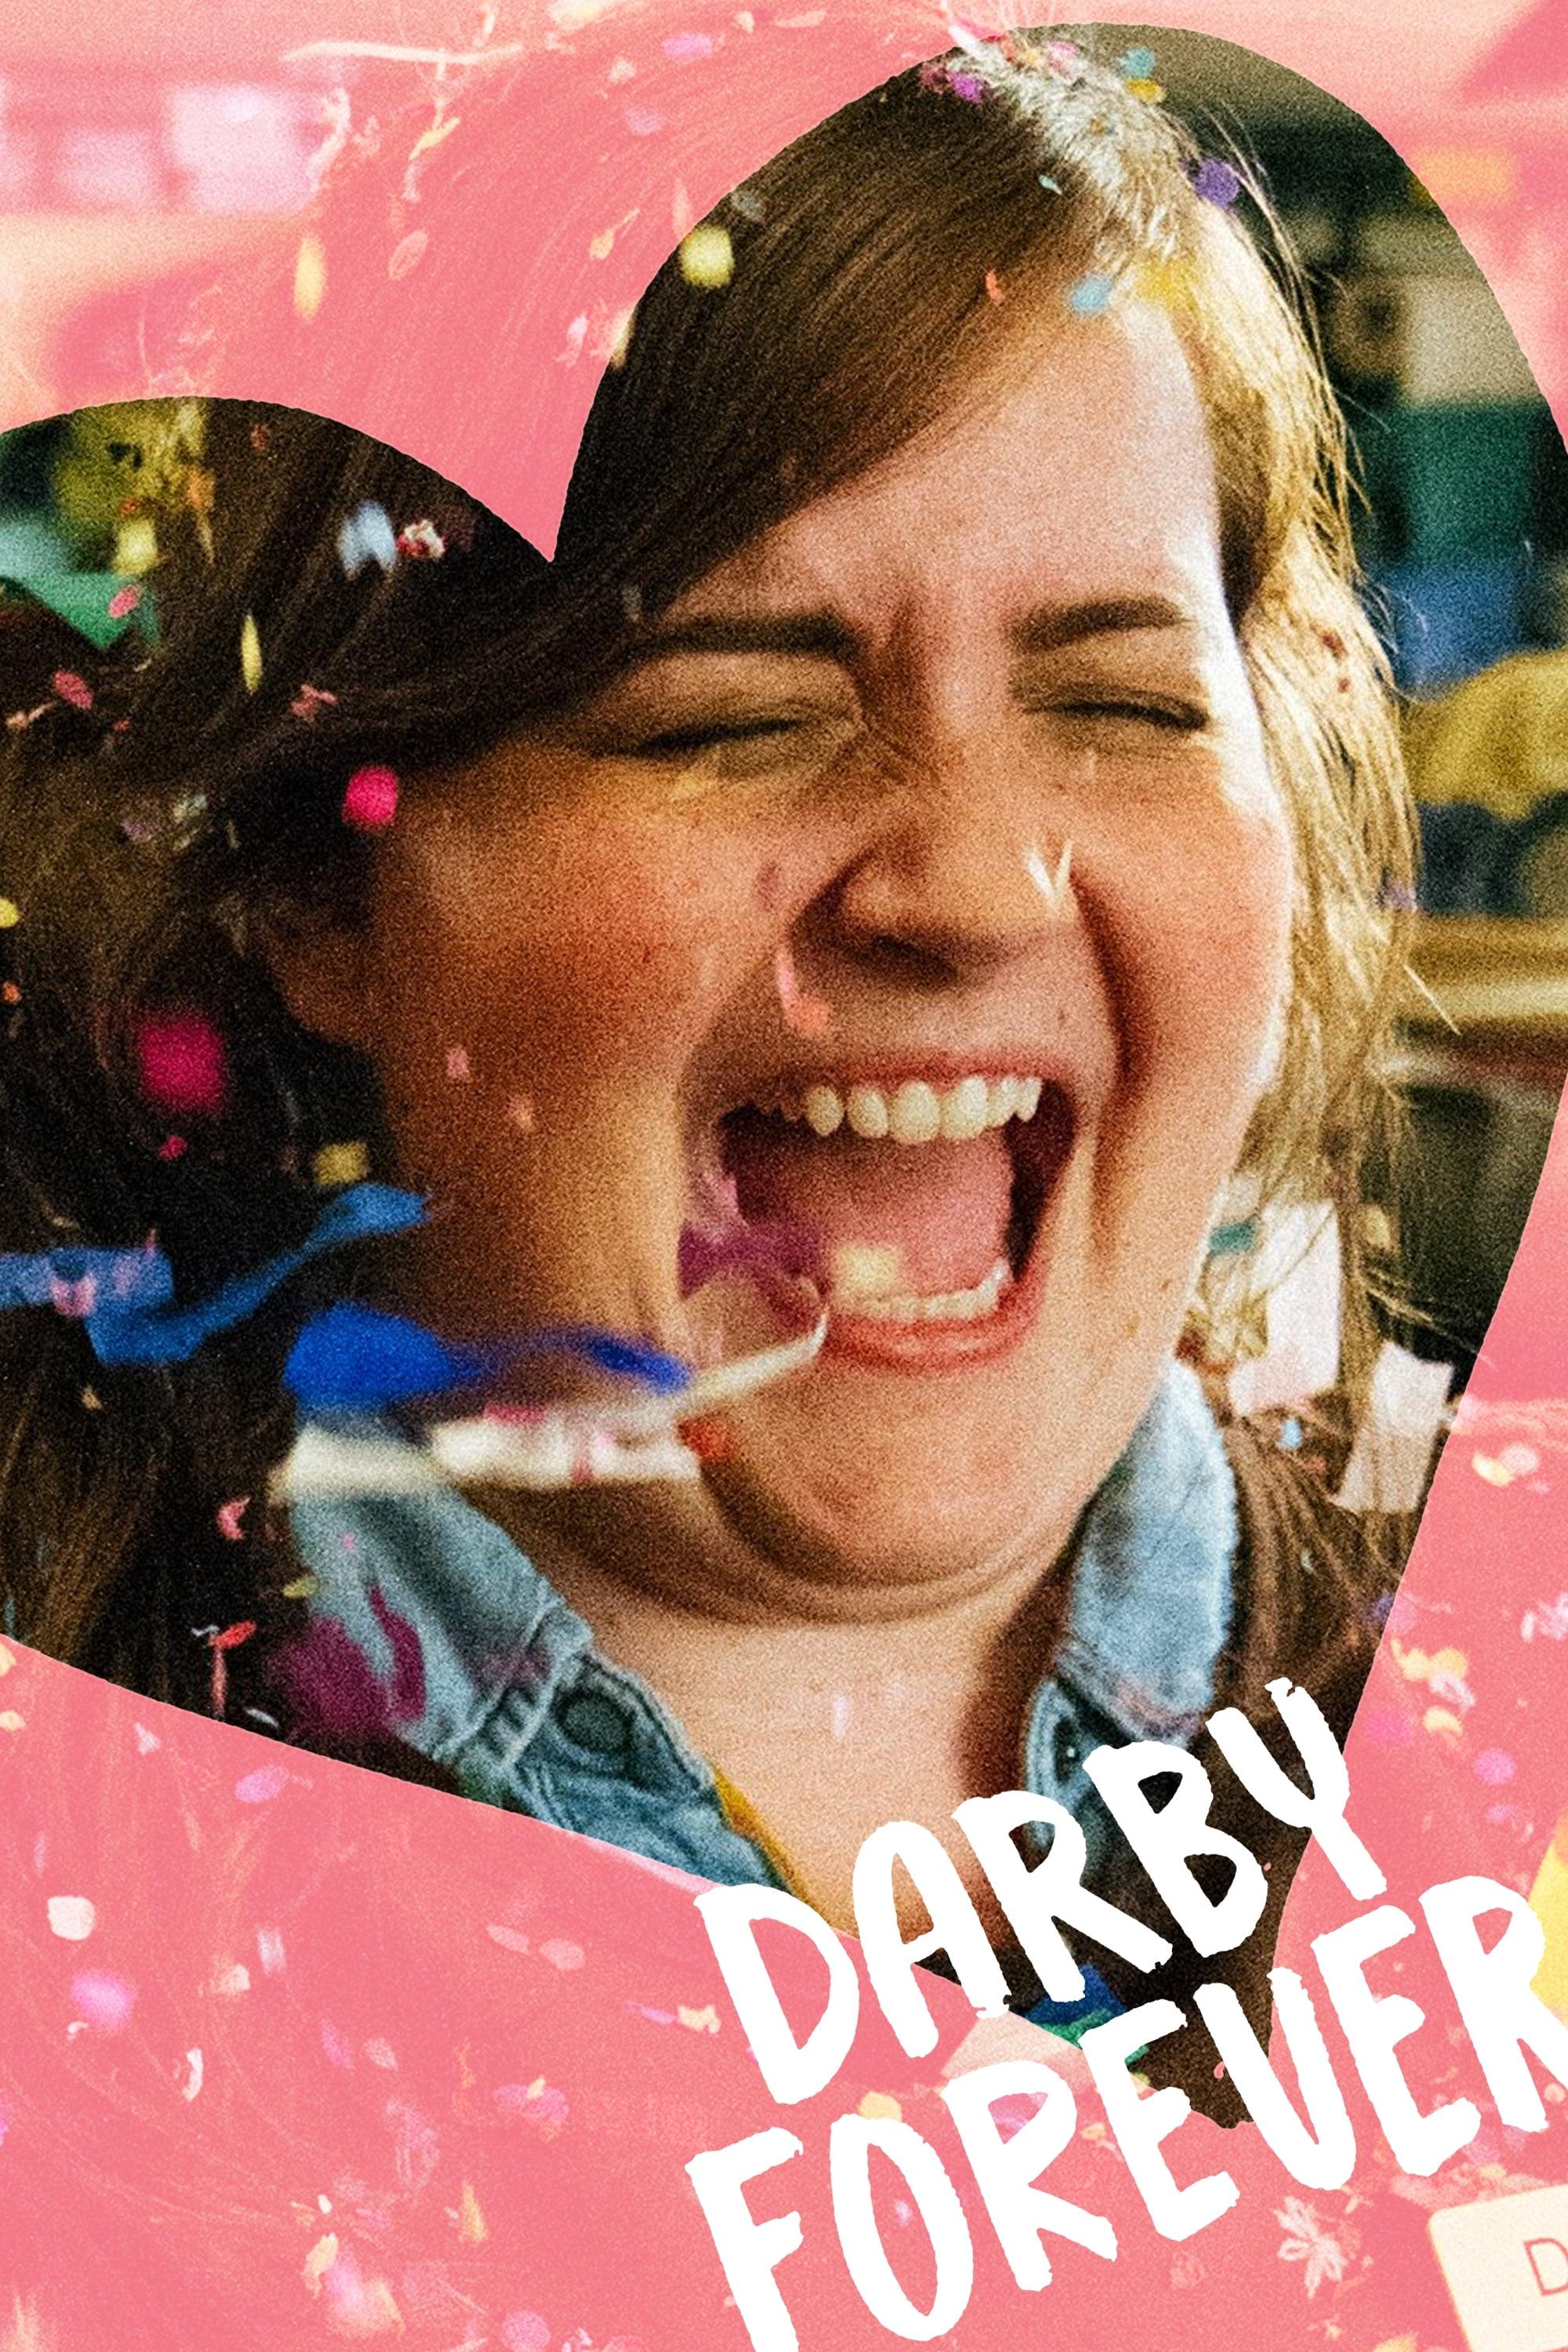 Darby Forever poster